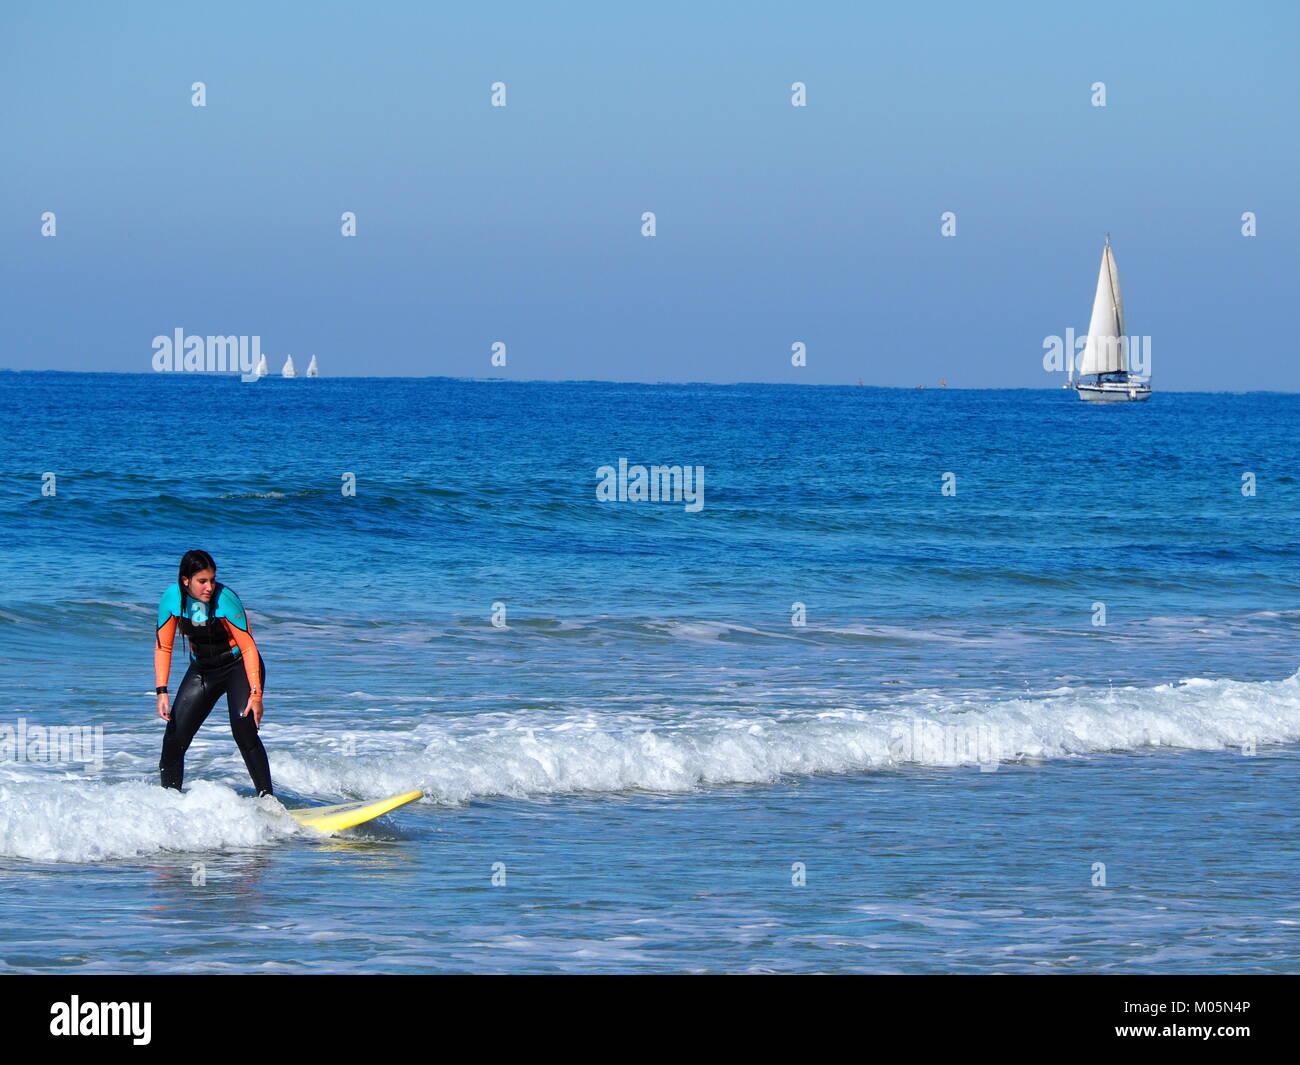 wave surfer girl at the sea on a perfect clear day Stock Photo